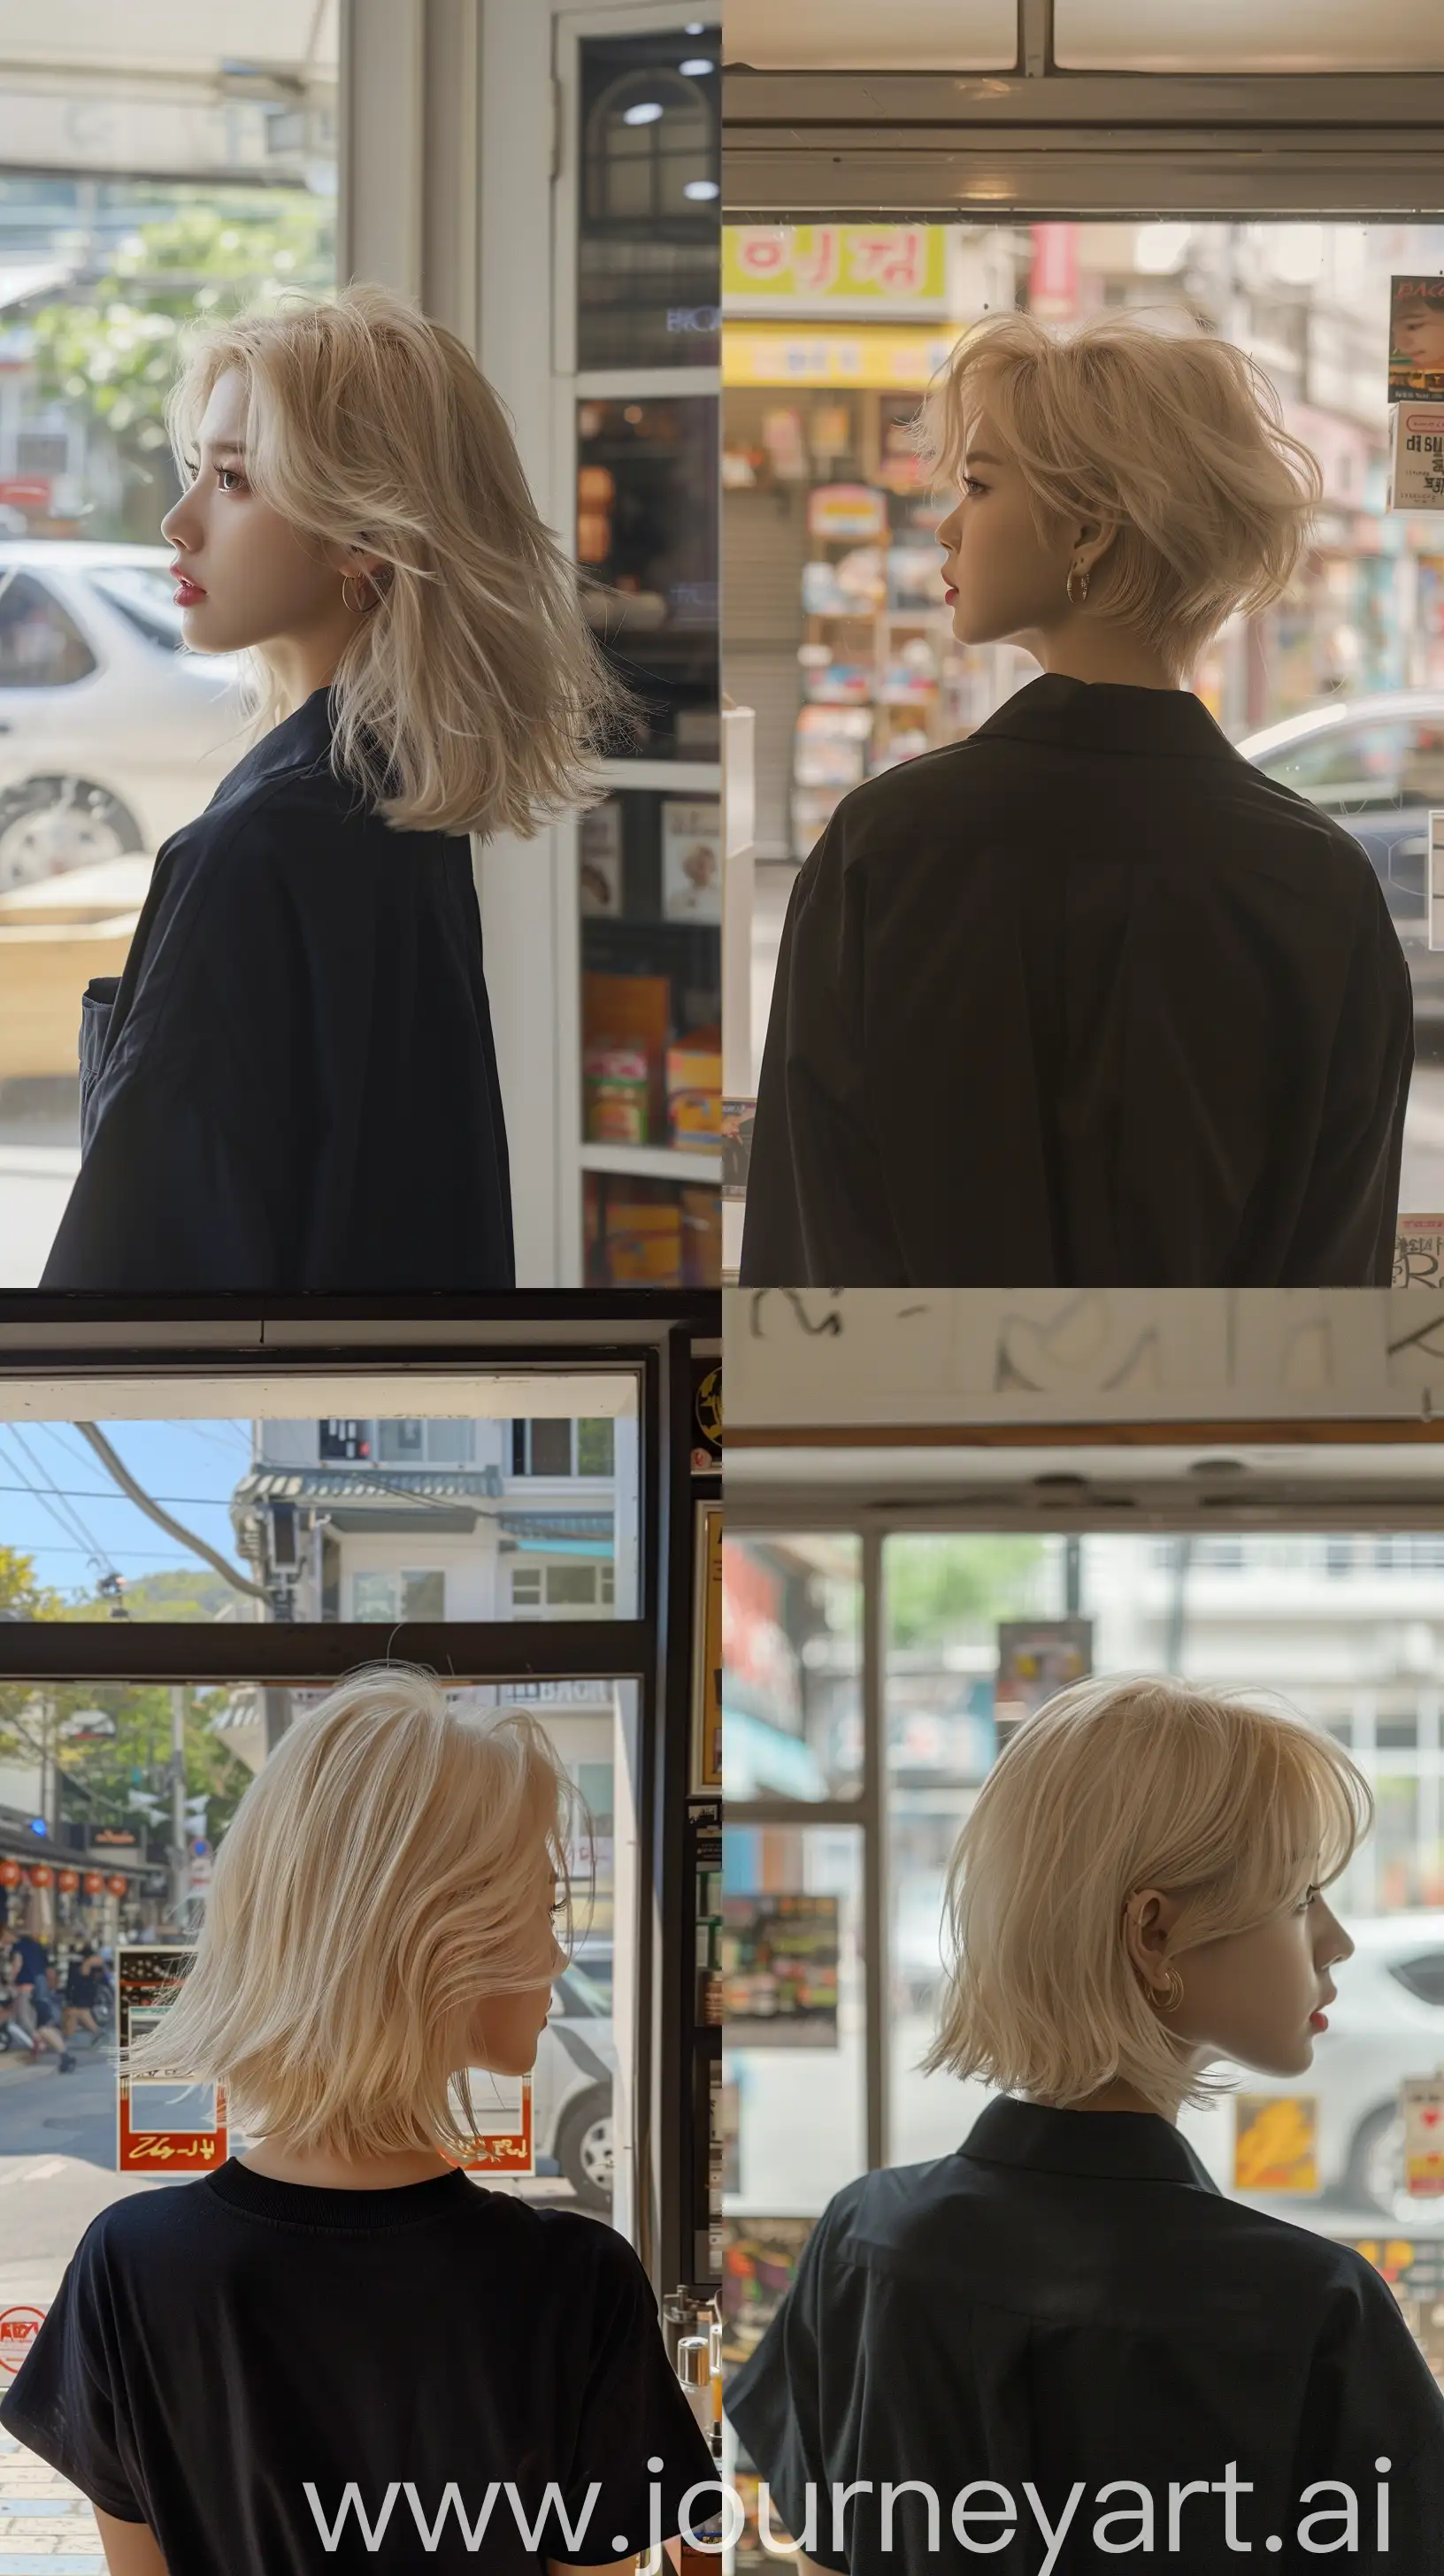 Blackpinks-Jennie-with-Blonde-Wolfcut-Hair-Stands-by-Shop-Window